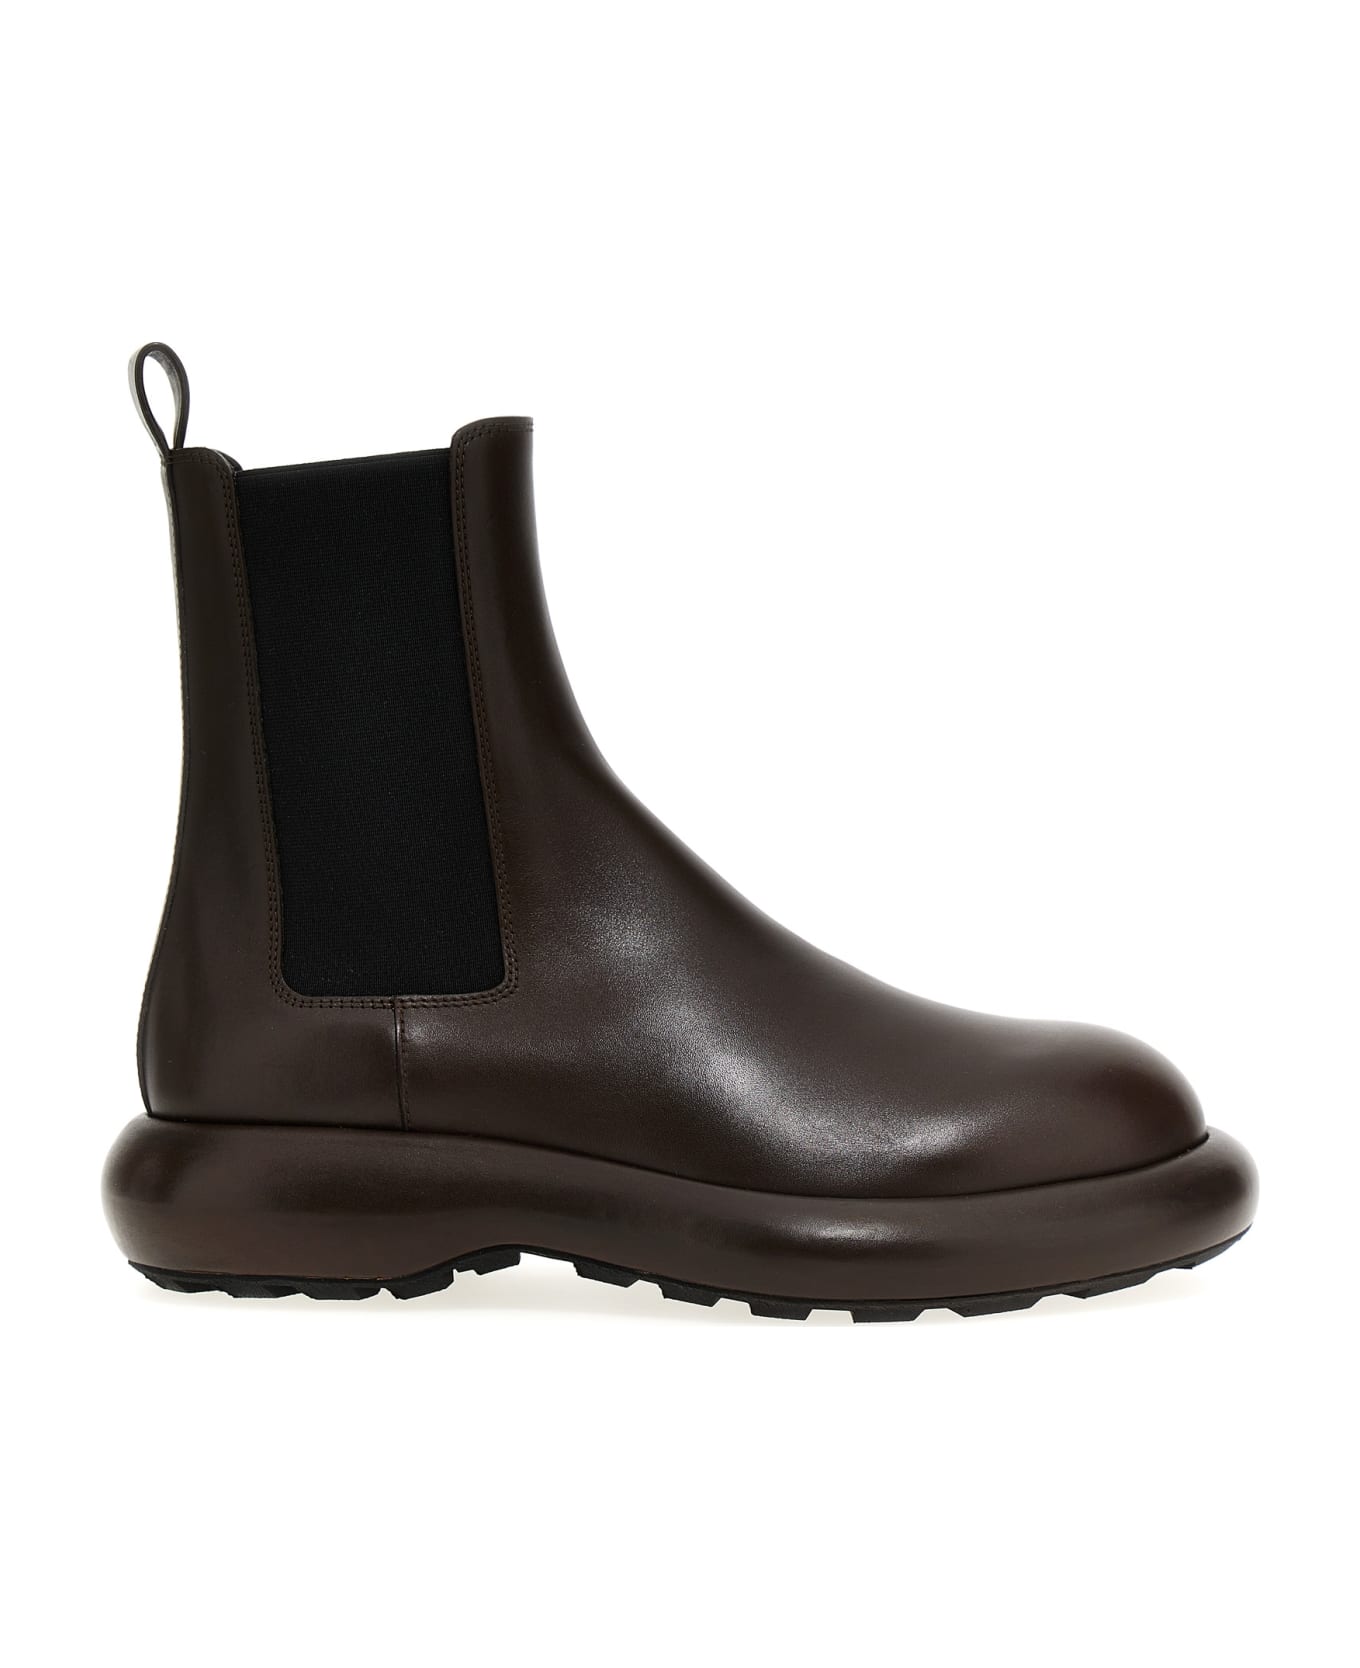 Jil Sander Brown Leather Ankle Boots - Brown ブーツ